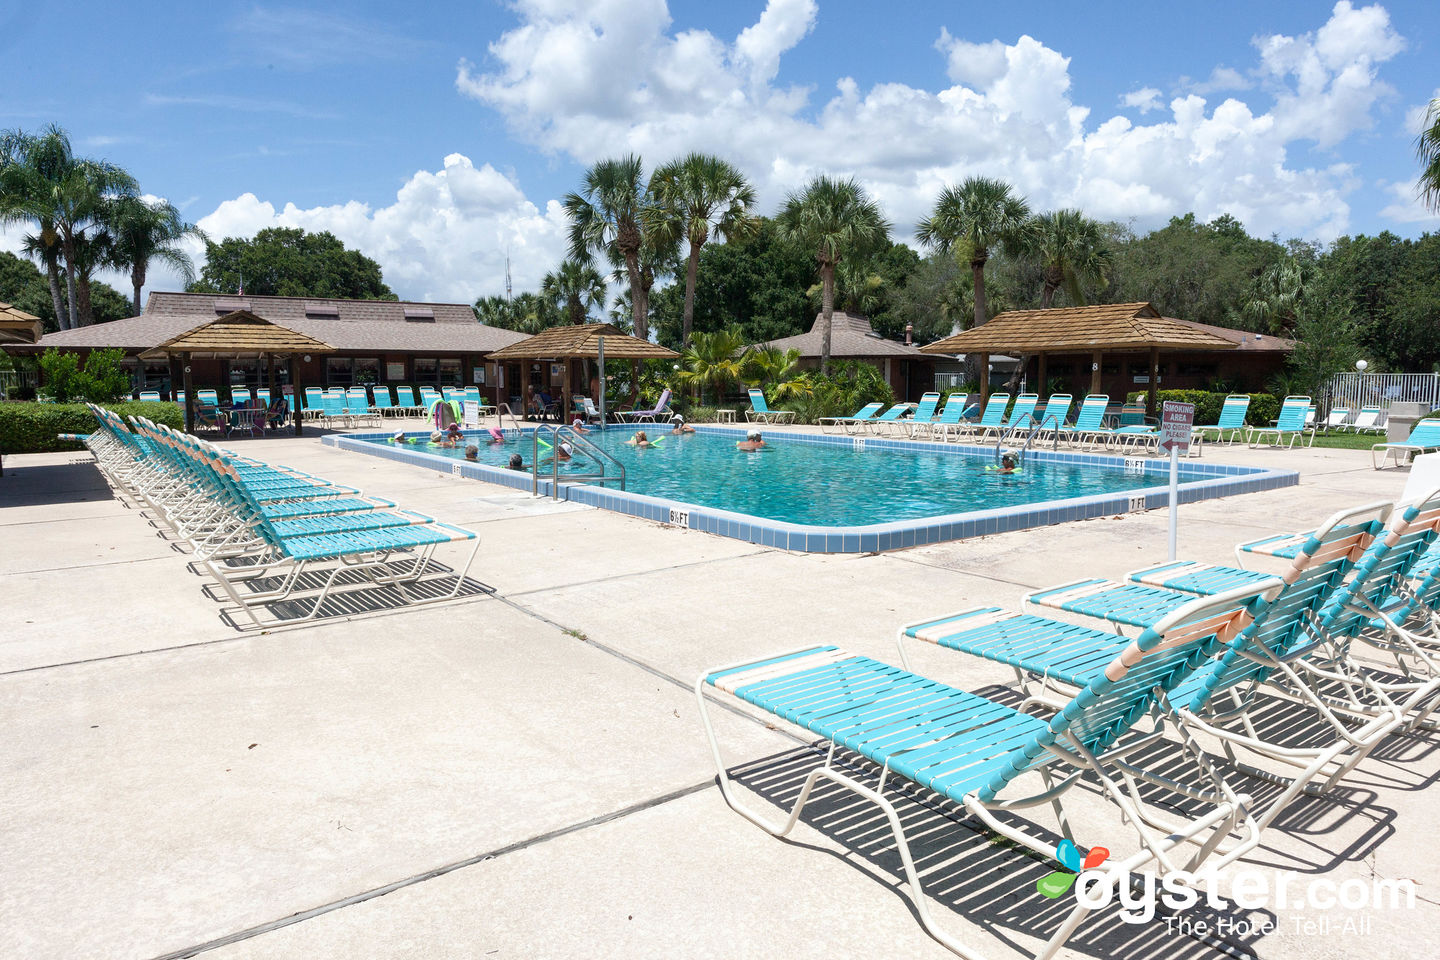 Central Floridas Cypress Cove Nudist Resort offers More 